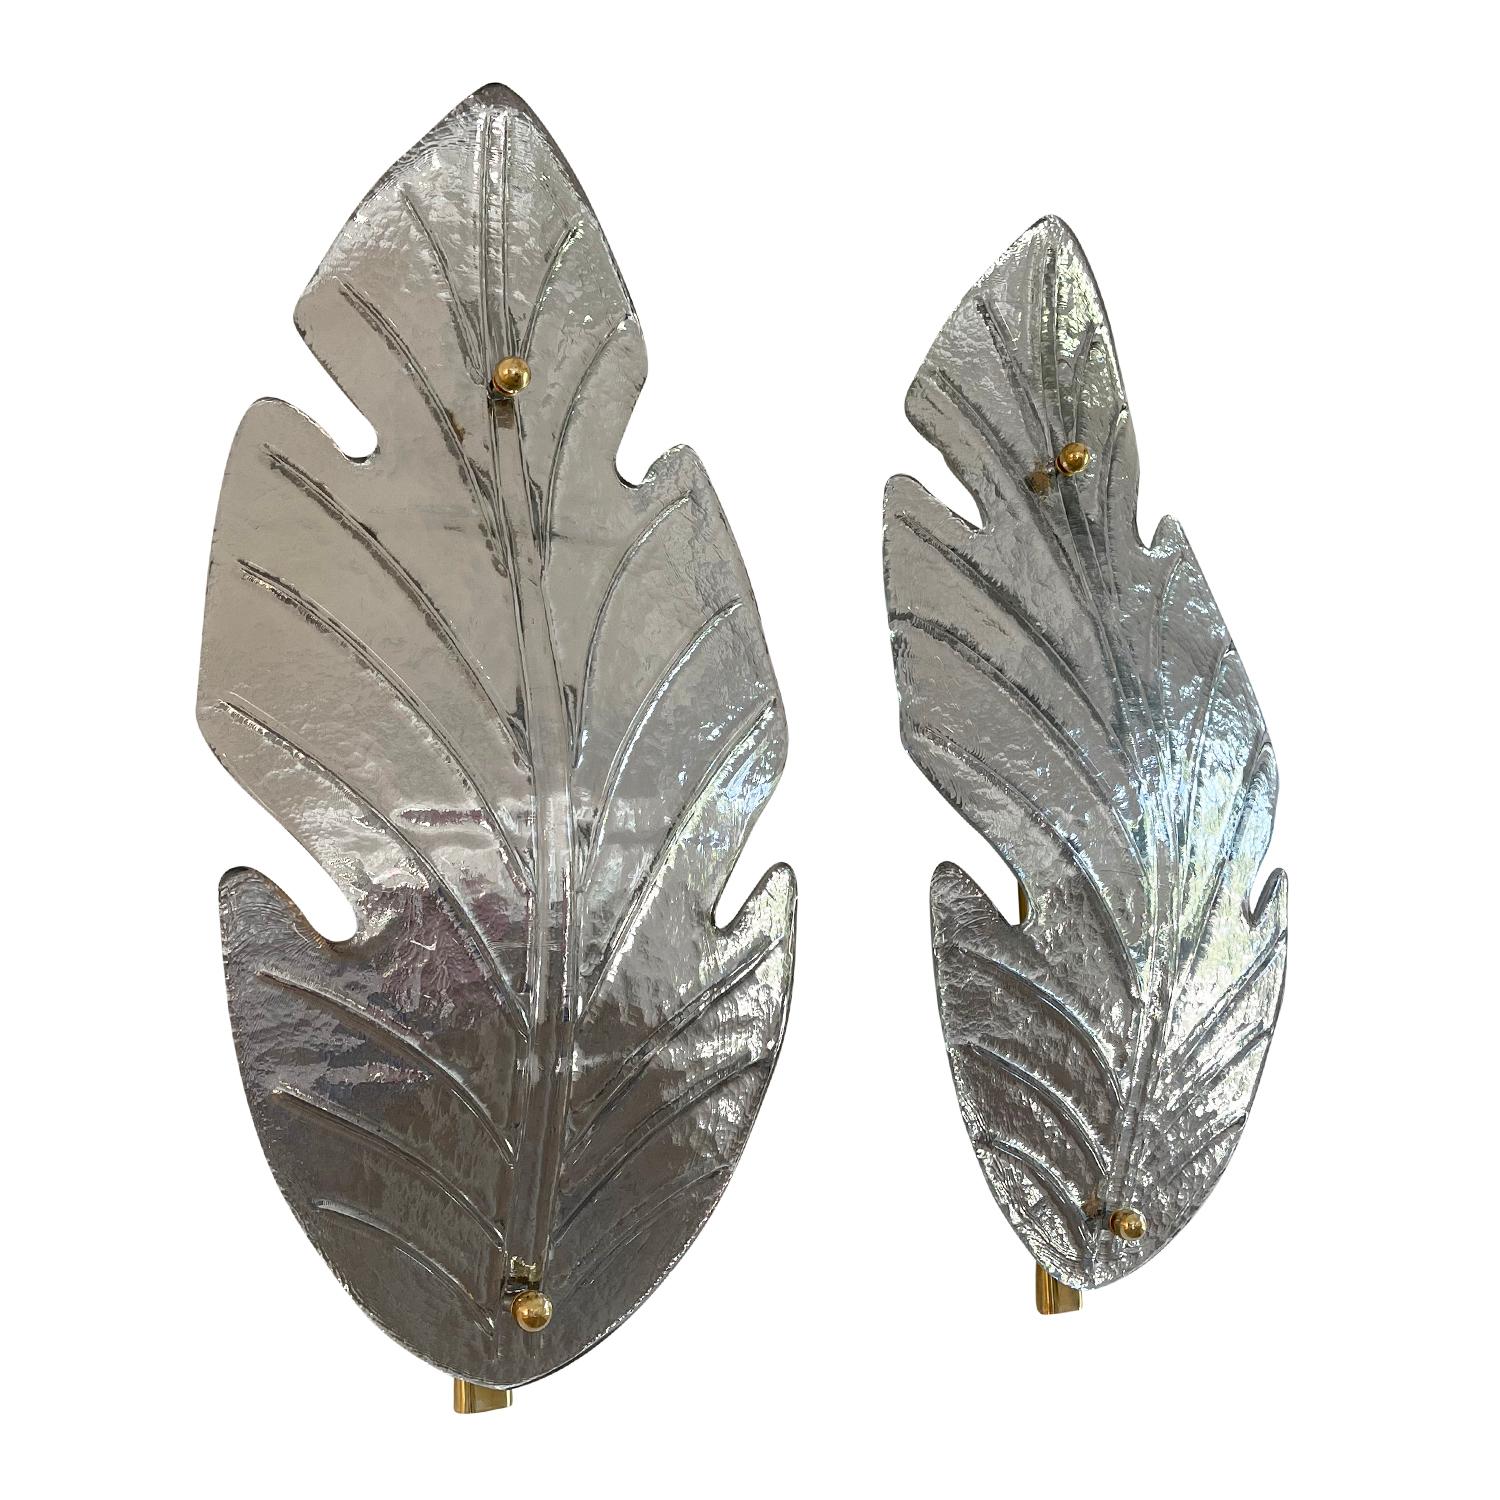 A large silver, slightly arched, vintage Mid-Century Modern Italian pair of wall sconces made of hand blown Murano Glass Sommerso, supported by a brass structure, imitating a leaf. Each of the appliques features two light sockets, in good condition.